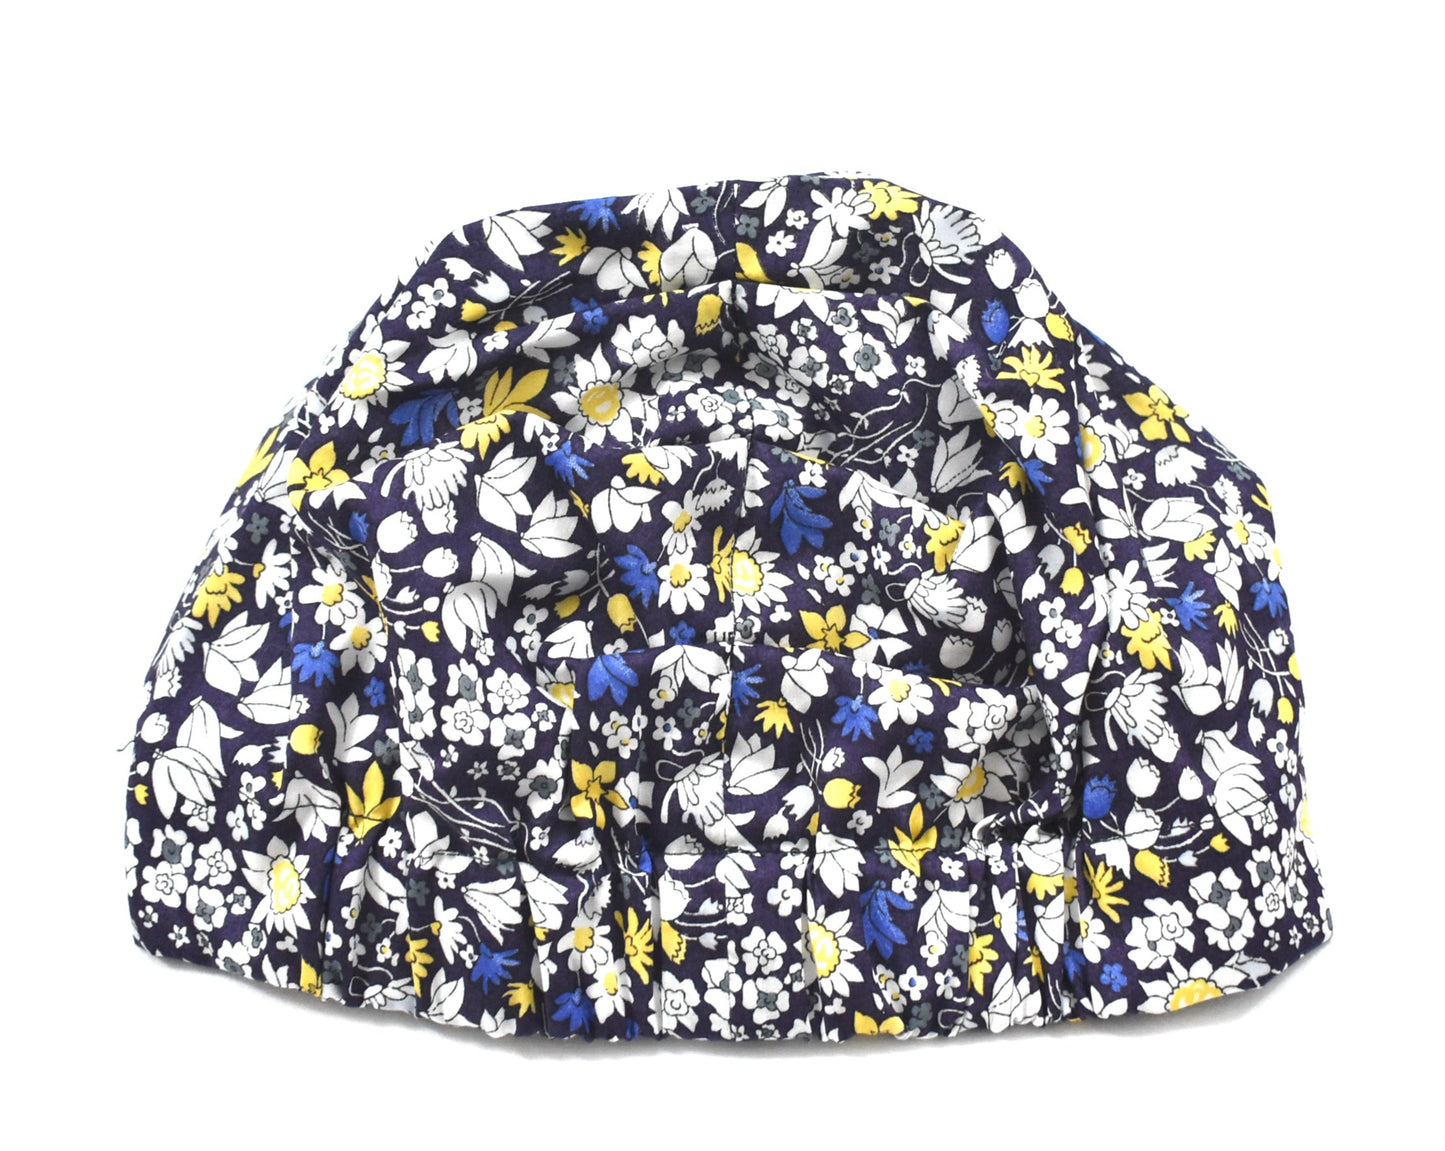 Ladies Turban Hat - Liberty of London Yellow and Navy Blue Floral